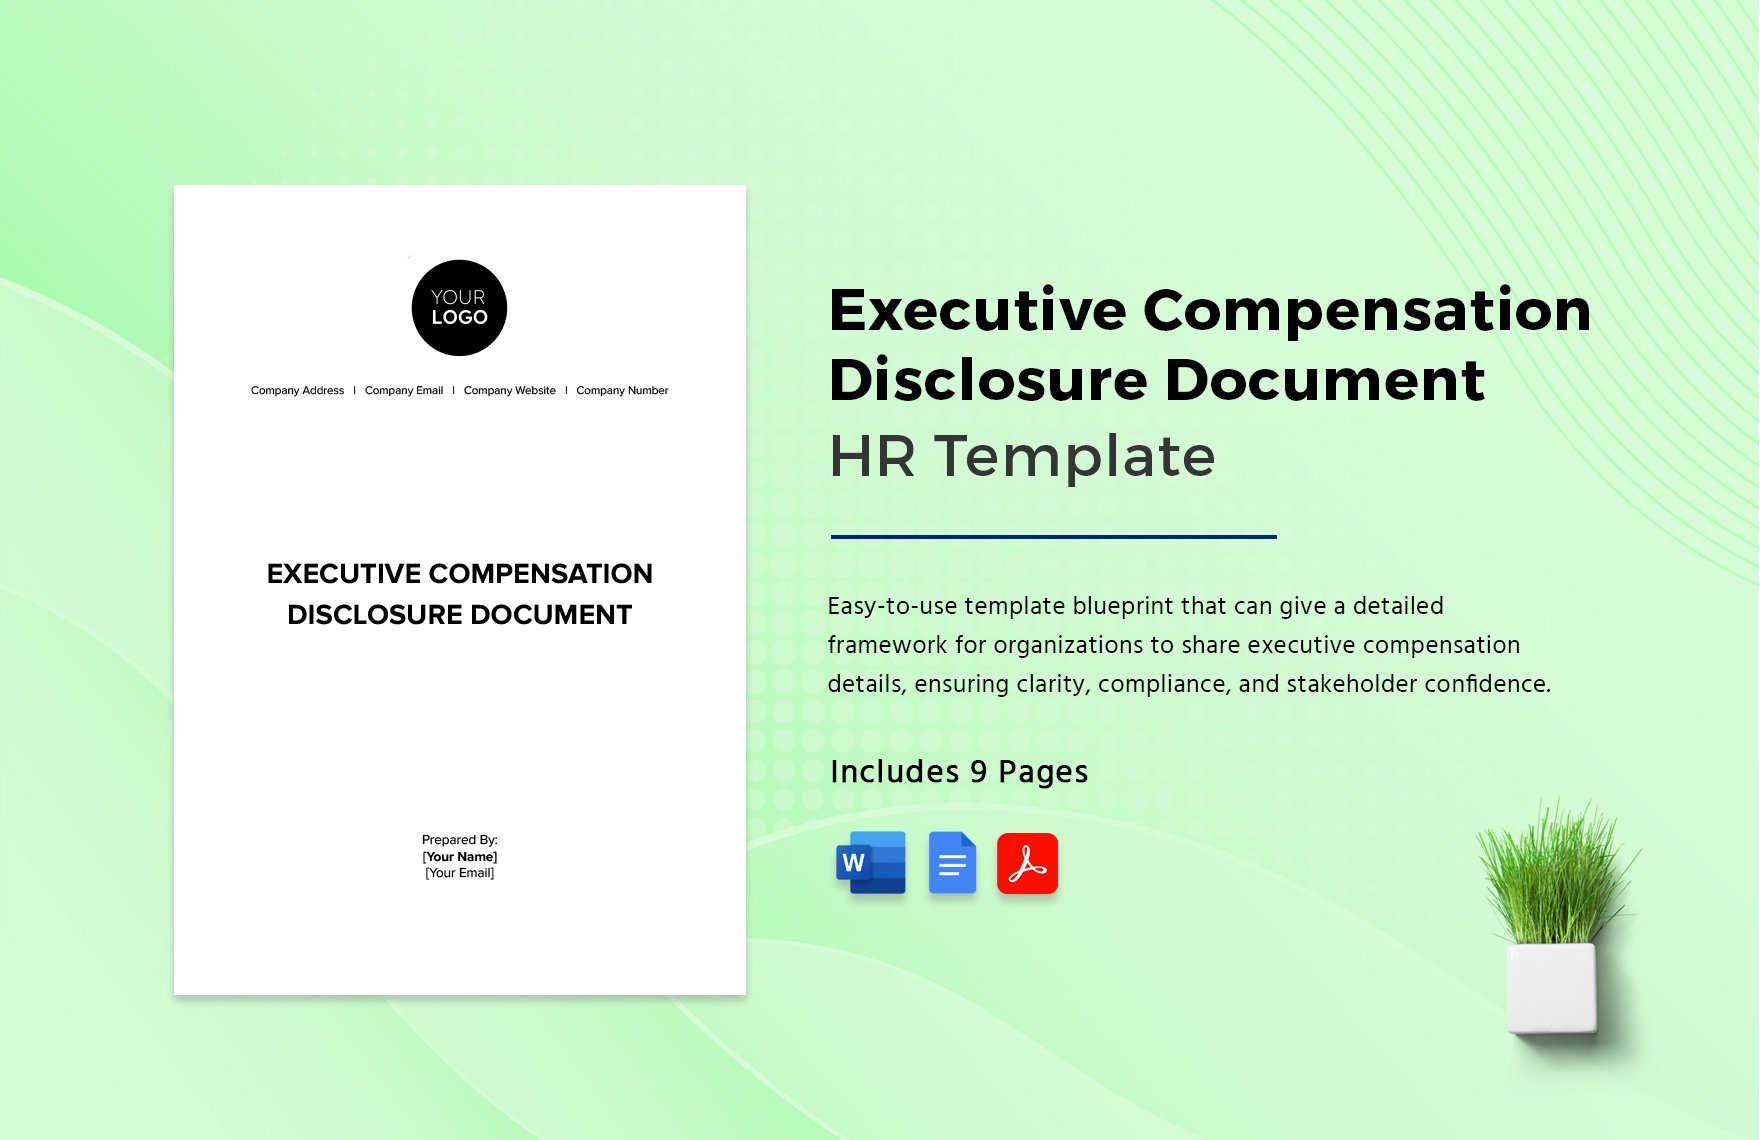 Executive Compensation Disclosure Document HR Template in Word, Google Docs, PDF, PowerPoint